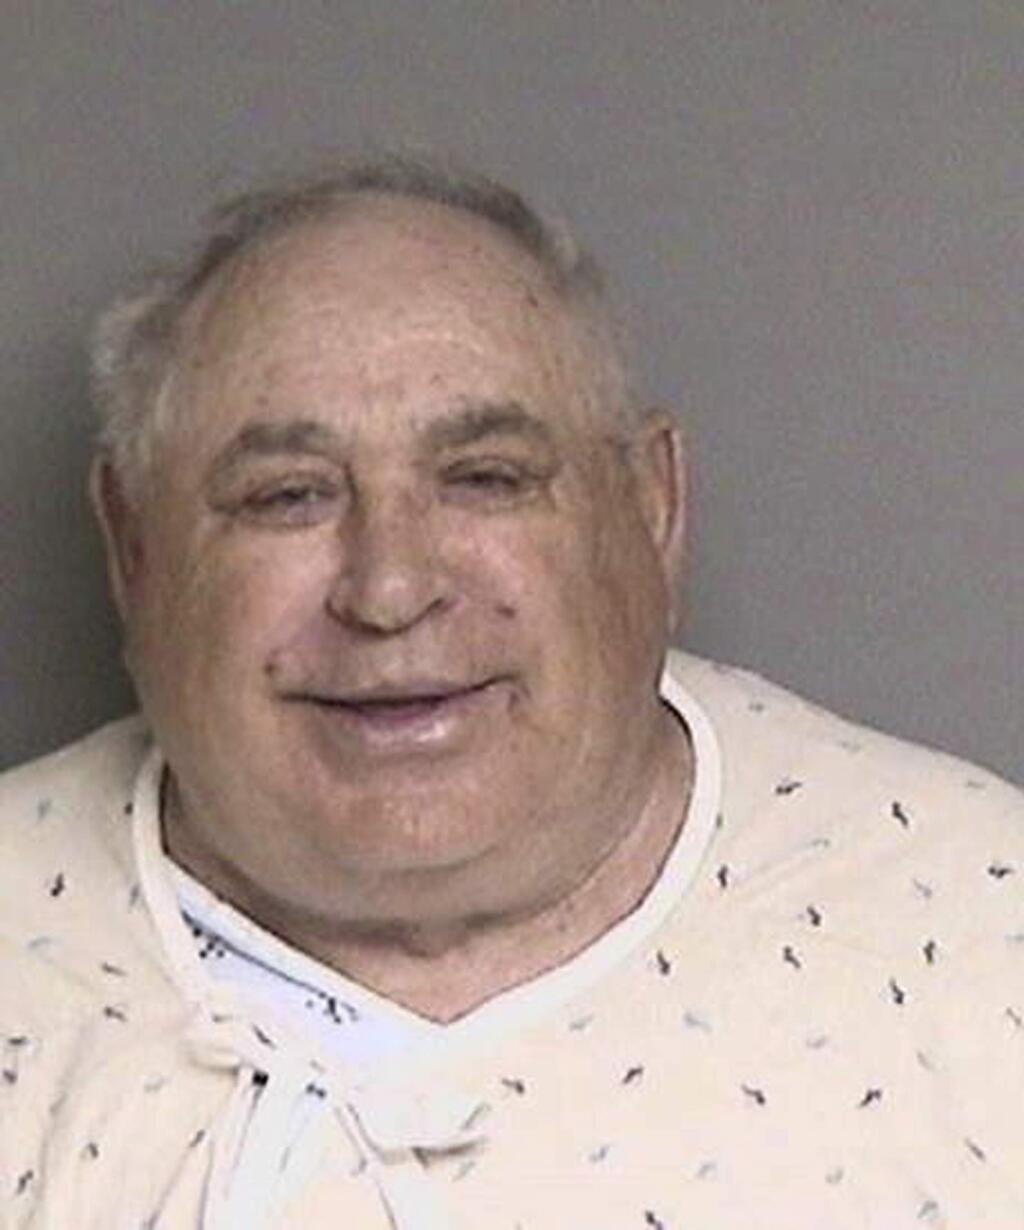 In this booking photo released Wednesday, June 20, 2018, by the Alameda County Sheriff's Office is Herman Levi Little, 75. Little was arrested last week and charged with trying to kill a 39-year-old man who rented a lower unit in the Berkeley, Calif., duplex Little owned. It's the third such violent incident between landlord and tenants in Northern California in recent weeks. (Alameda County Sheriff's Office via AP)